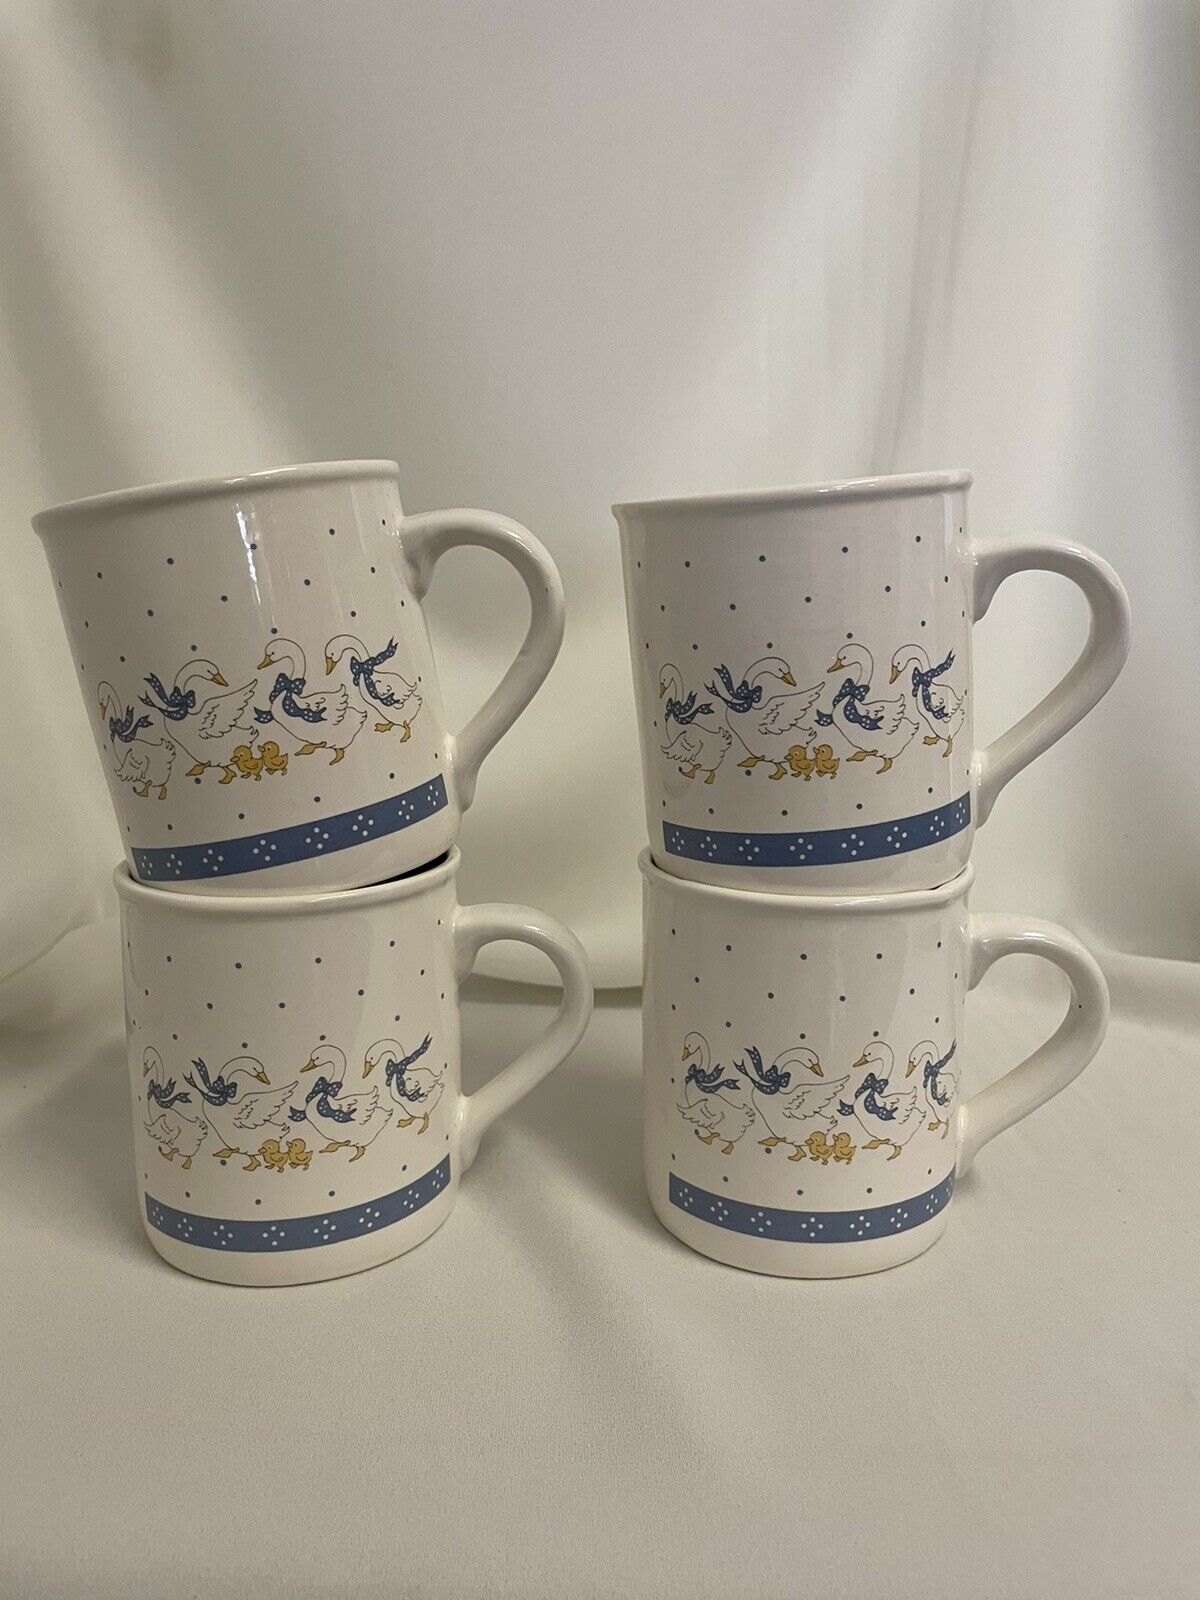 Vintage Blue Ribbon Geese Set Of 4 Coffee Mugs 1980s Geese And Chicks